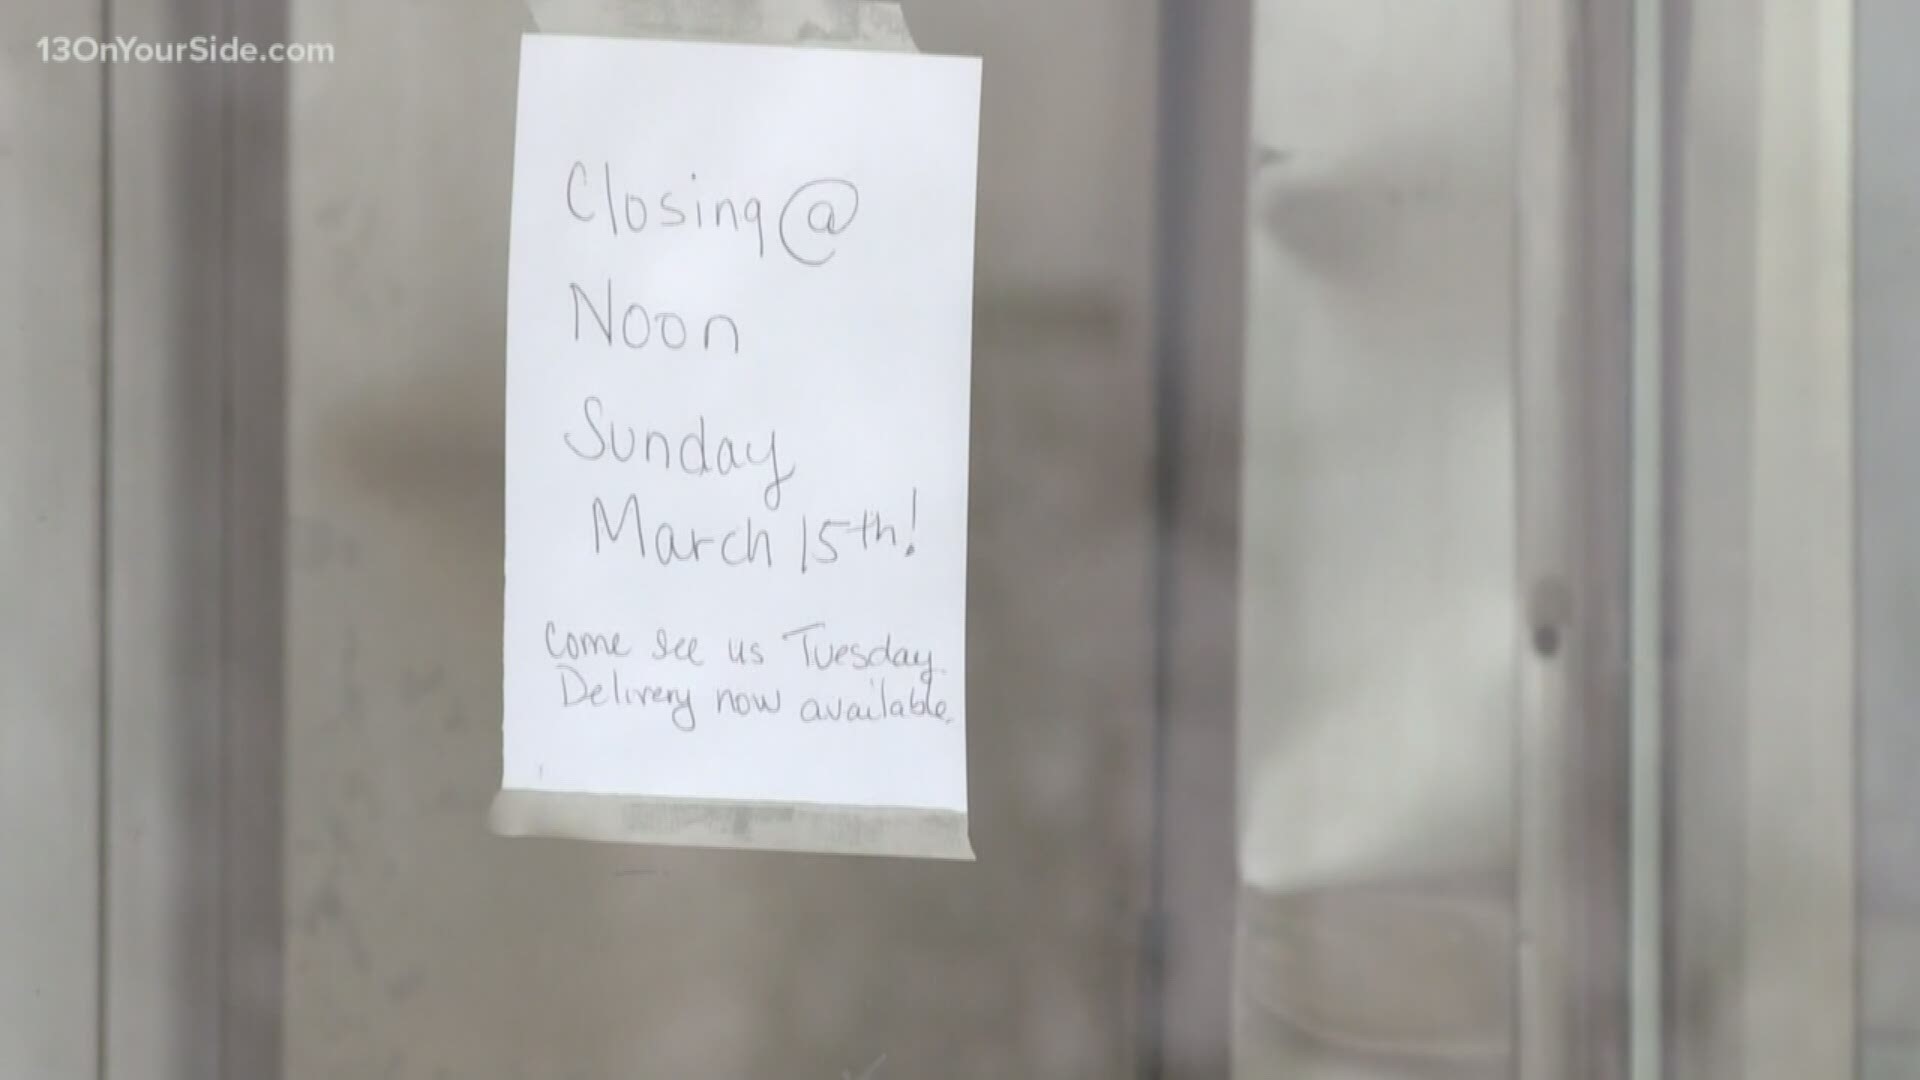 Small businesses are likely going to stay closed through at least the month of April.